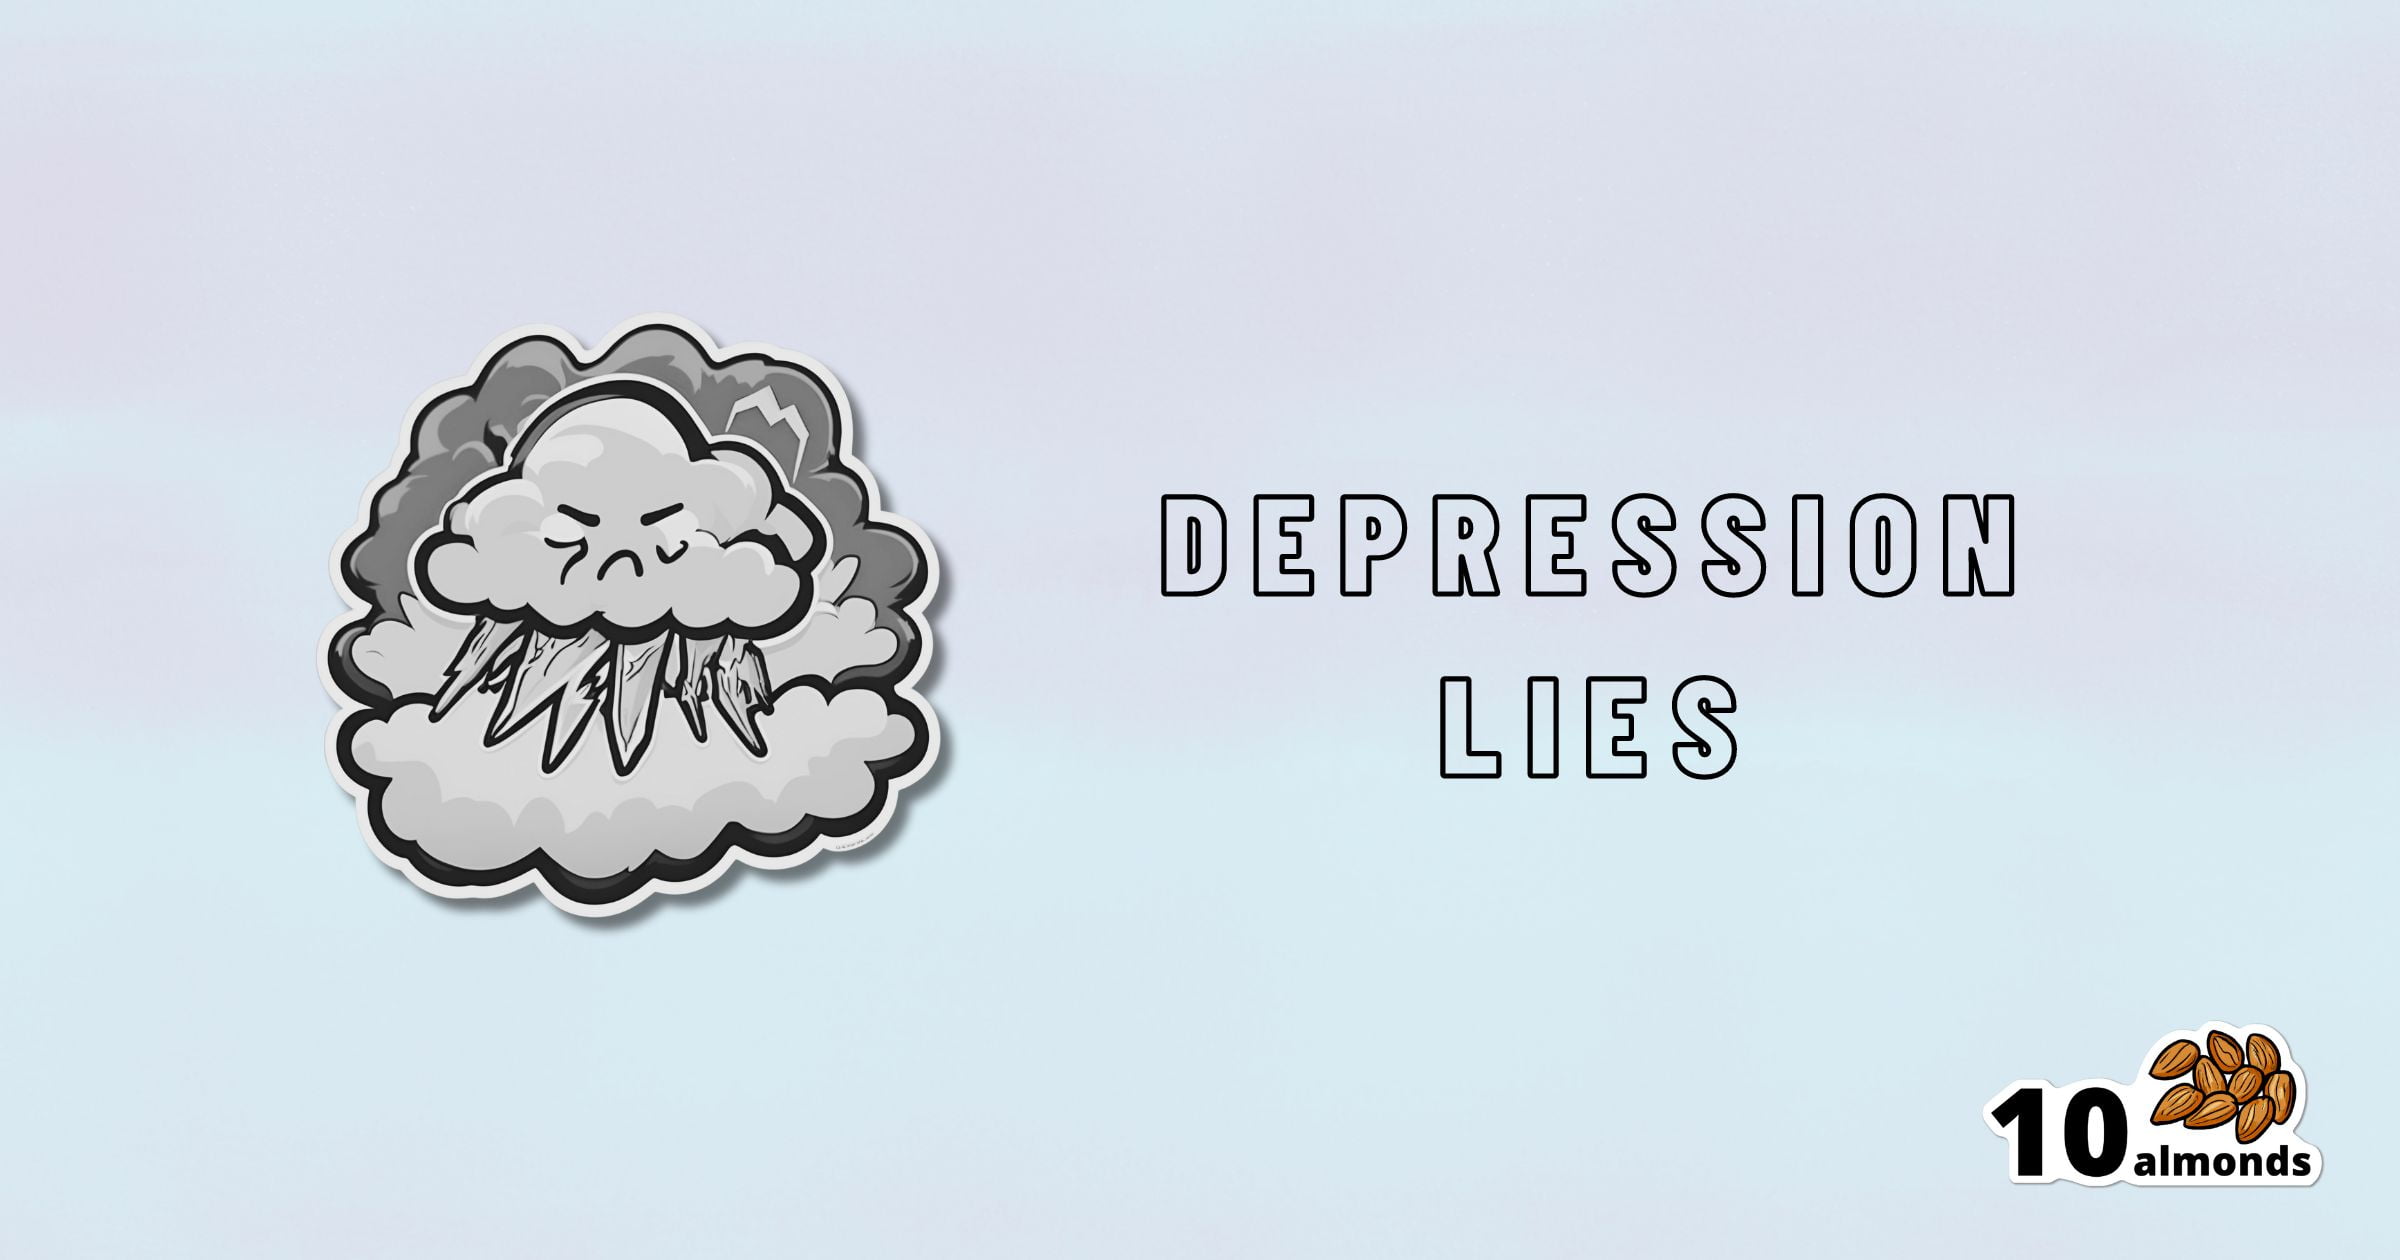 A gray cartoon cloud with a frowning face and lightning bolts appears on the left. To the right, the text boldly states "DEPRESSION LIES." In the bottom right corner, there is an image of 10 almonds with the number "10" next to them, tying into themes of mental health and mindfulness.